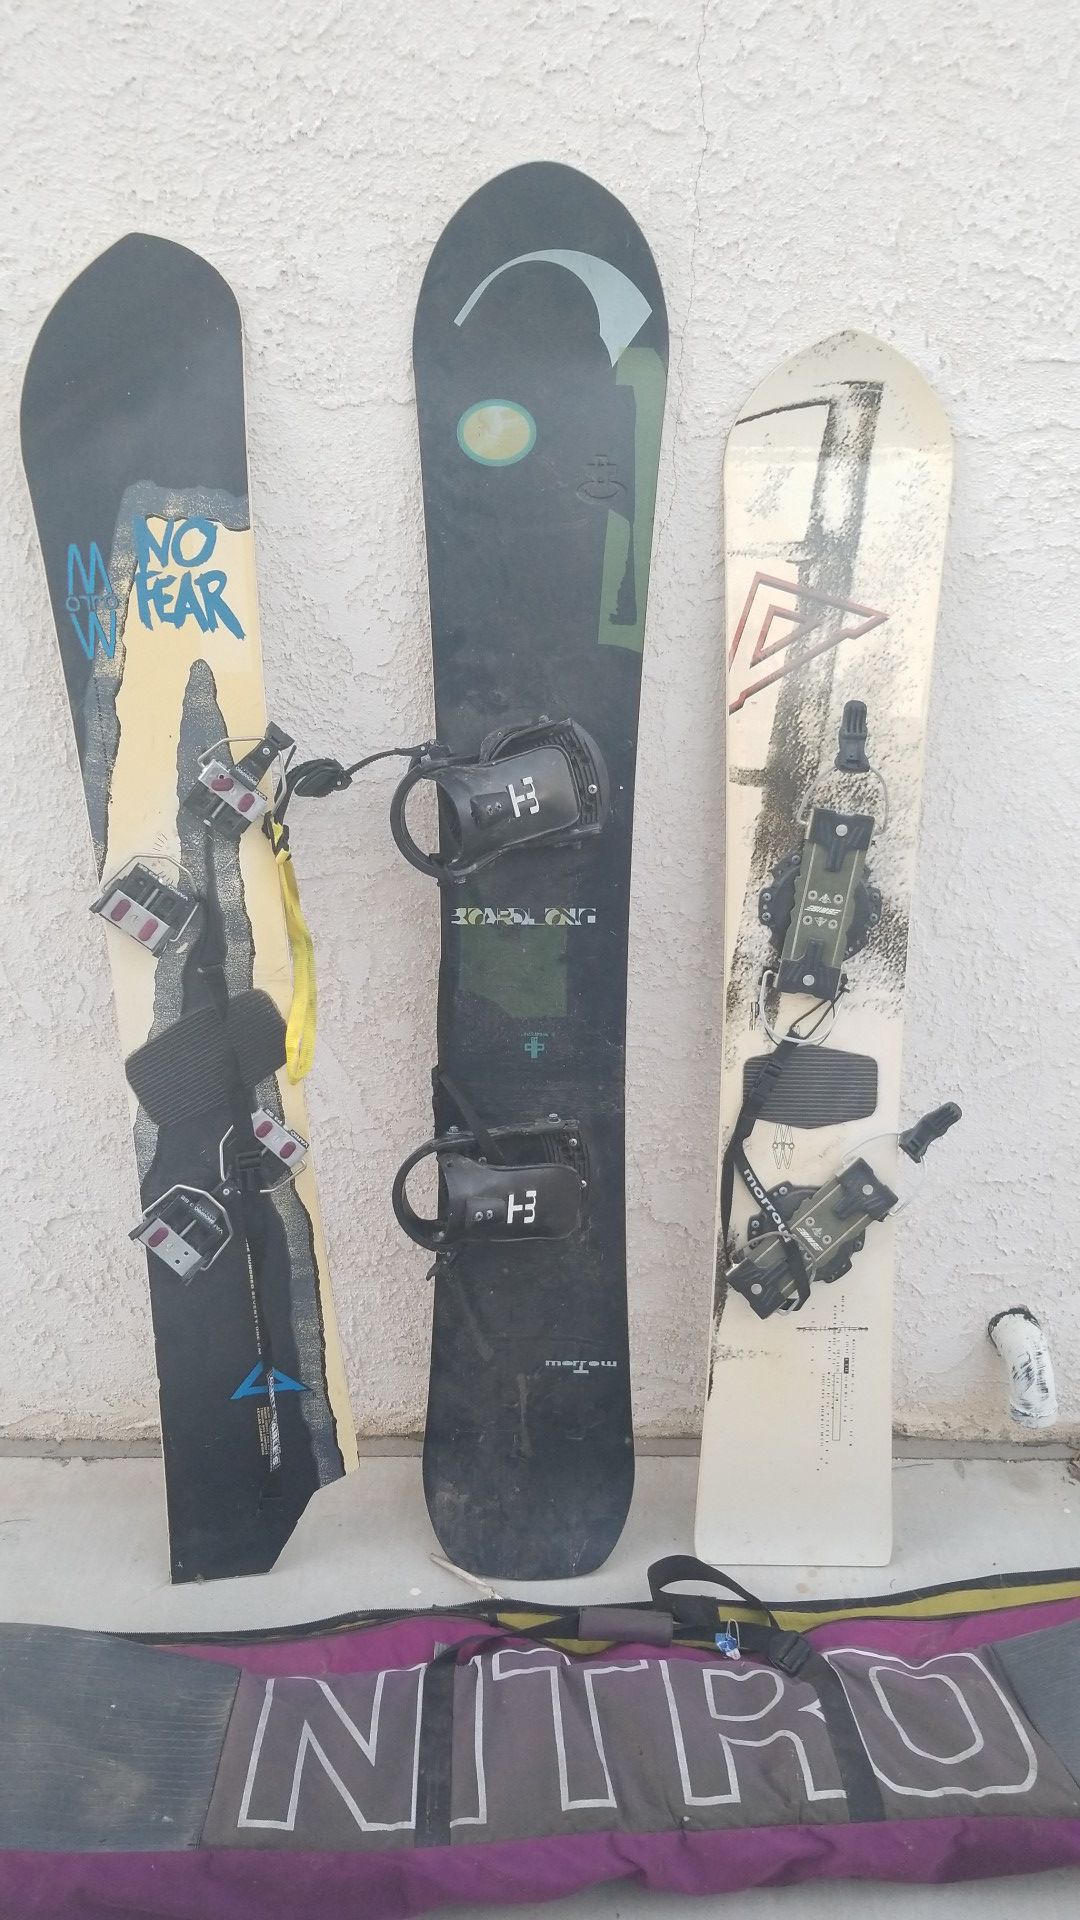 3 snowboards and a bag